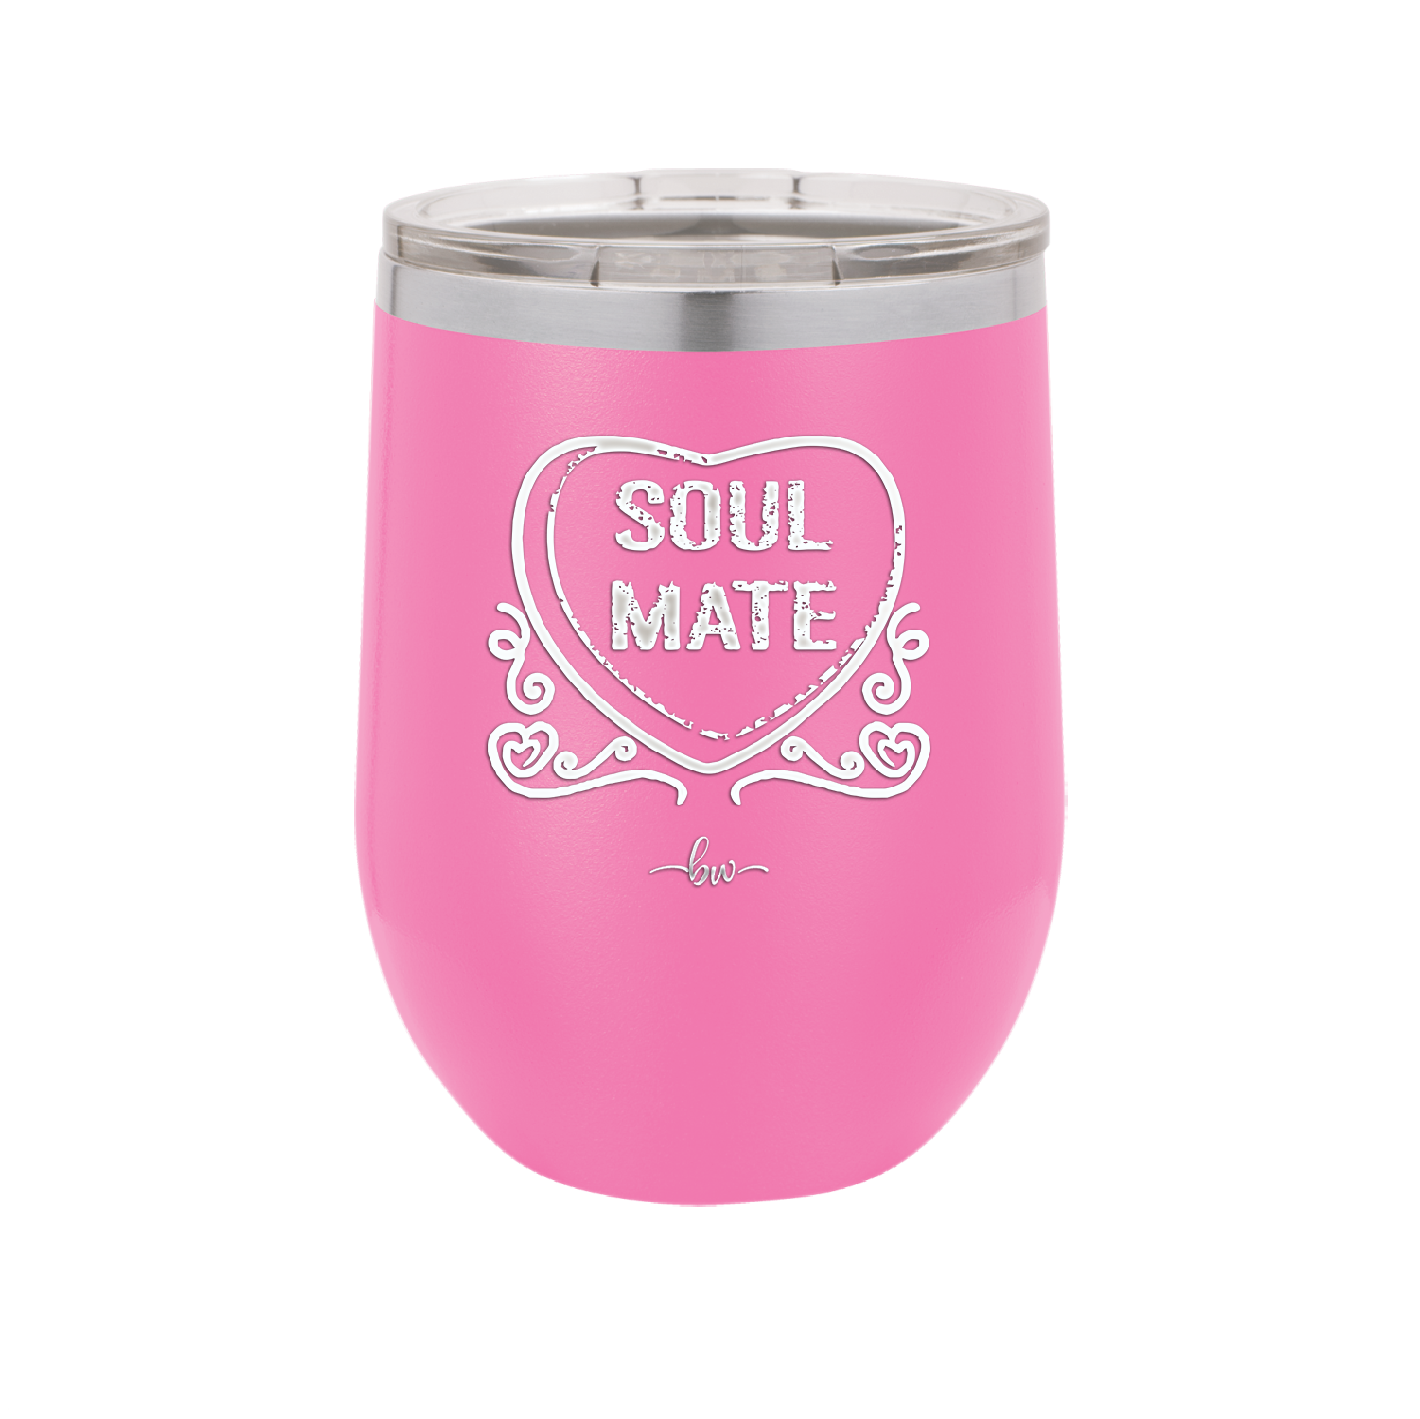 Candy Heart Soul Mate - Laser Engraved Stainless Steel Drinkware - 1763 -